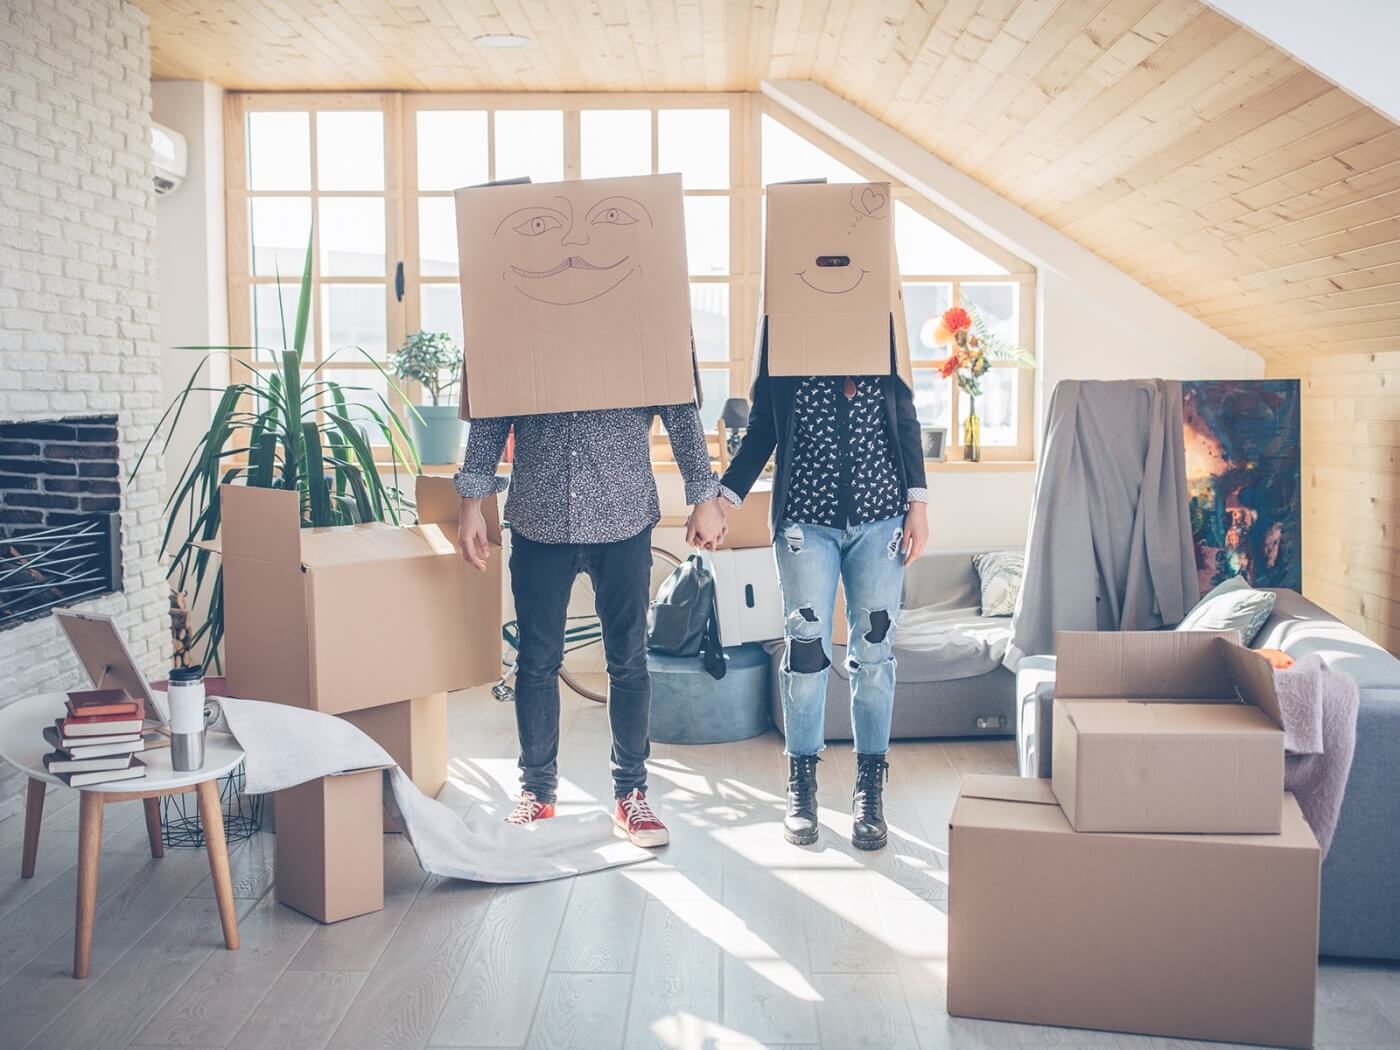 Top tips for finding good tenants